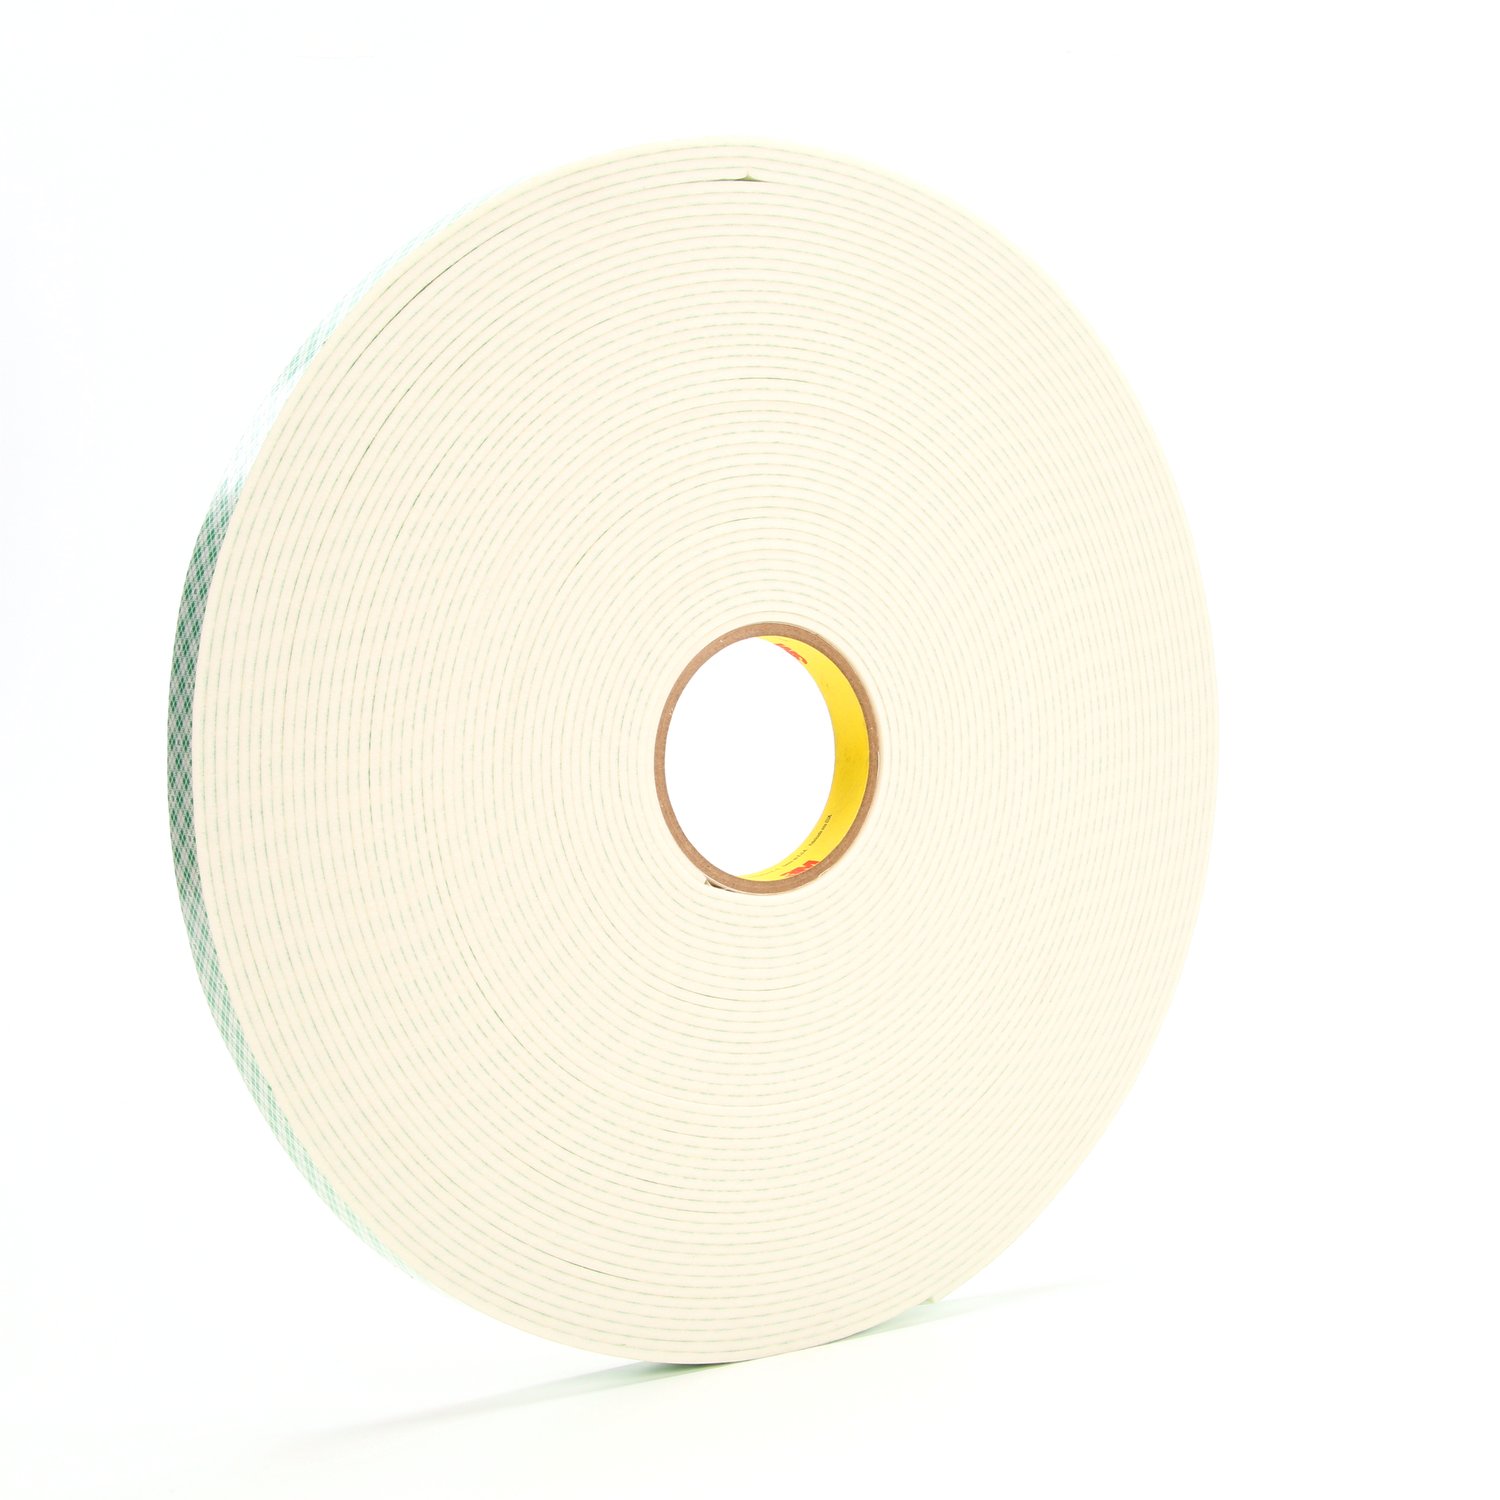 7000048482 - 3M Double Coated Urethane Foam Tape 4008, Off White, 3/4 in x 36 yd,
125 mil, 12 rolls per case